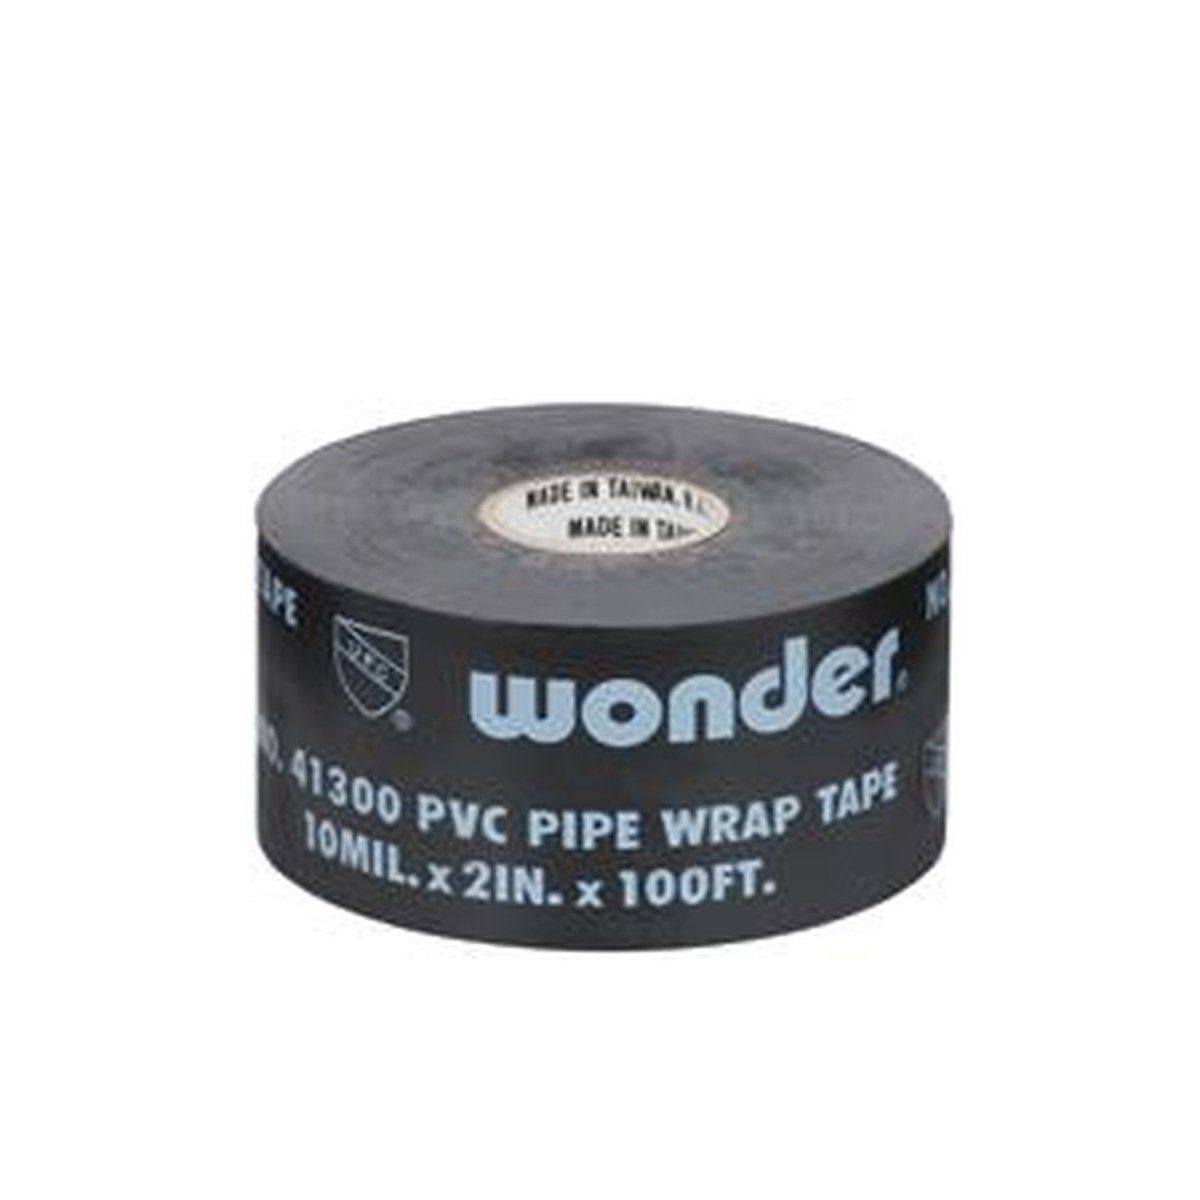 PVC PIPE WRAPPING TAPE 2 X 30